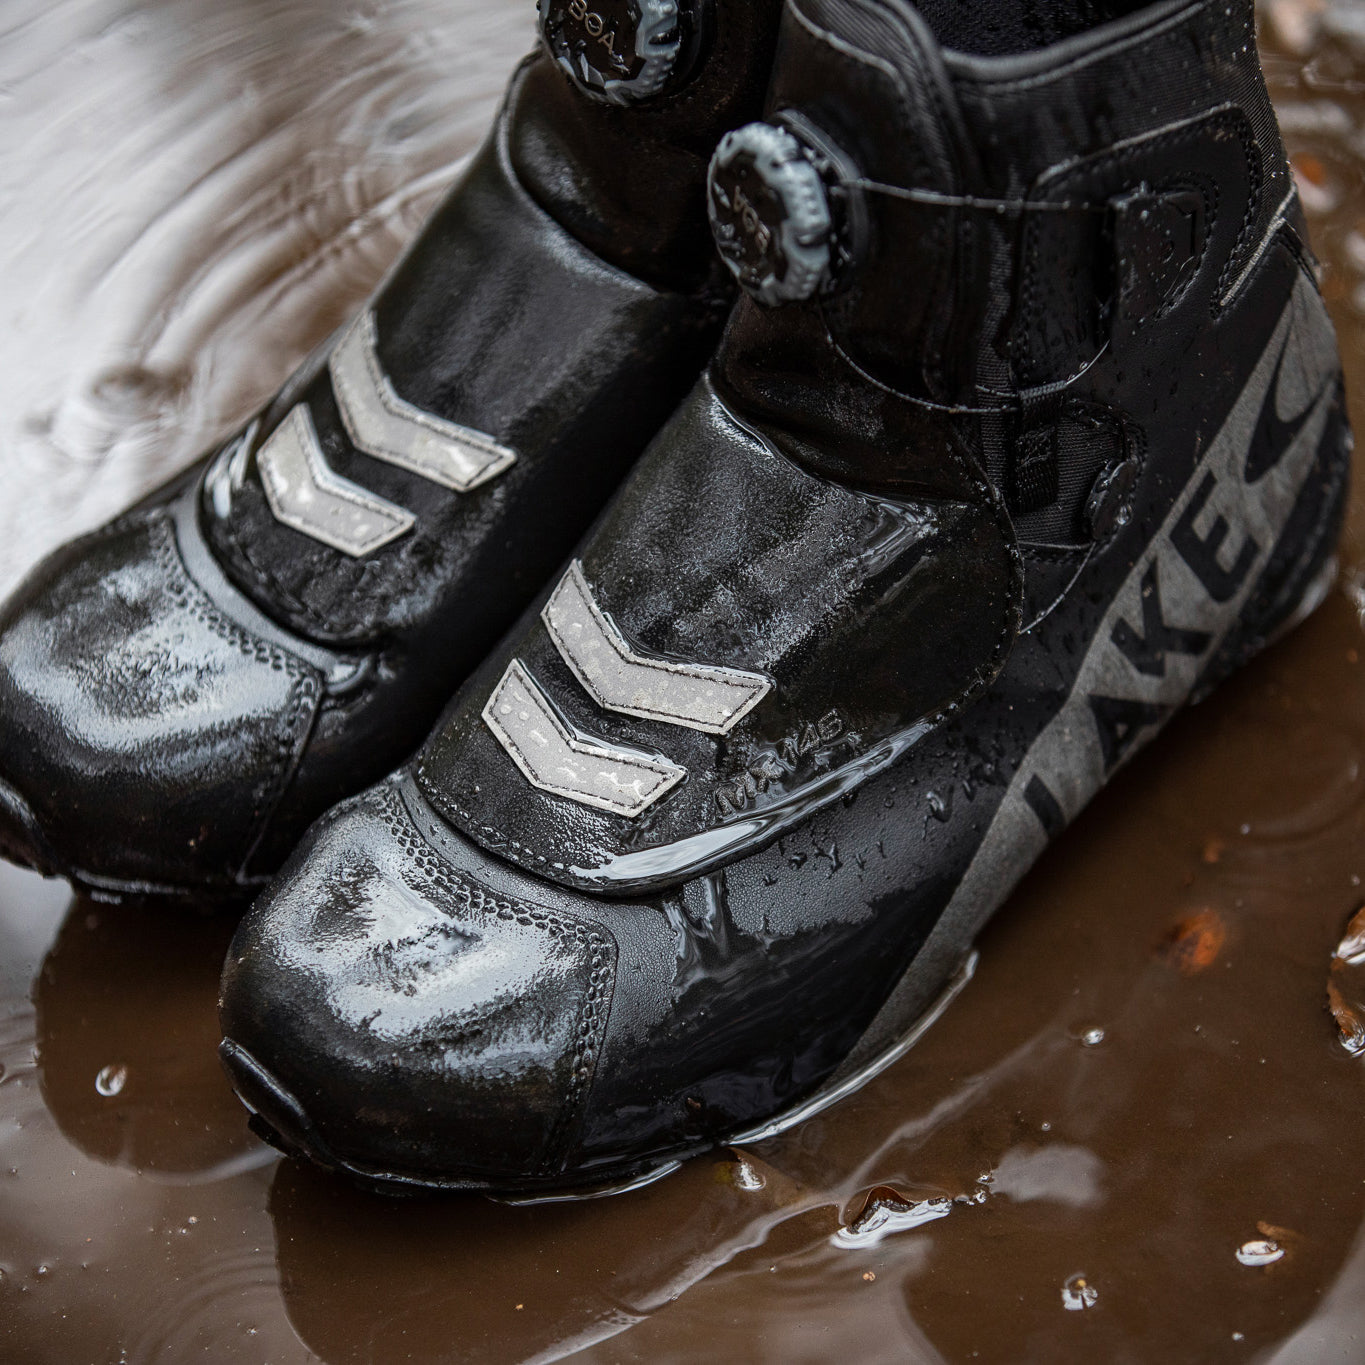 Looking after and cleaning wet cycling shoes